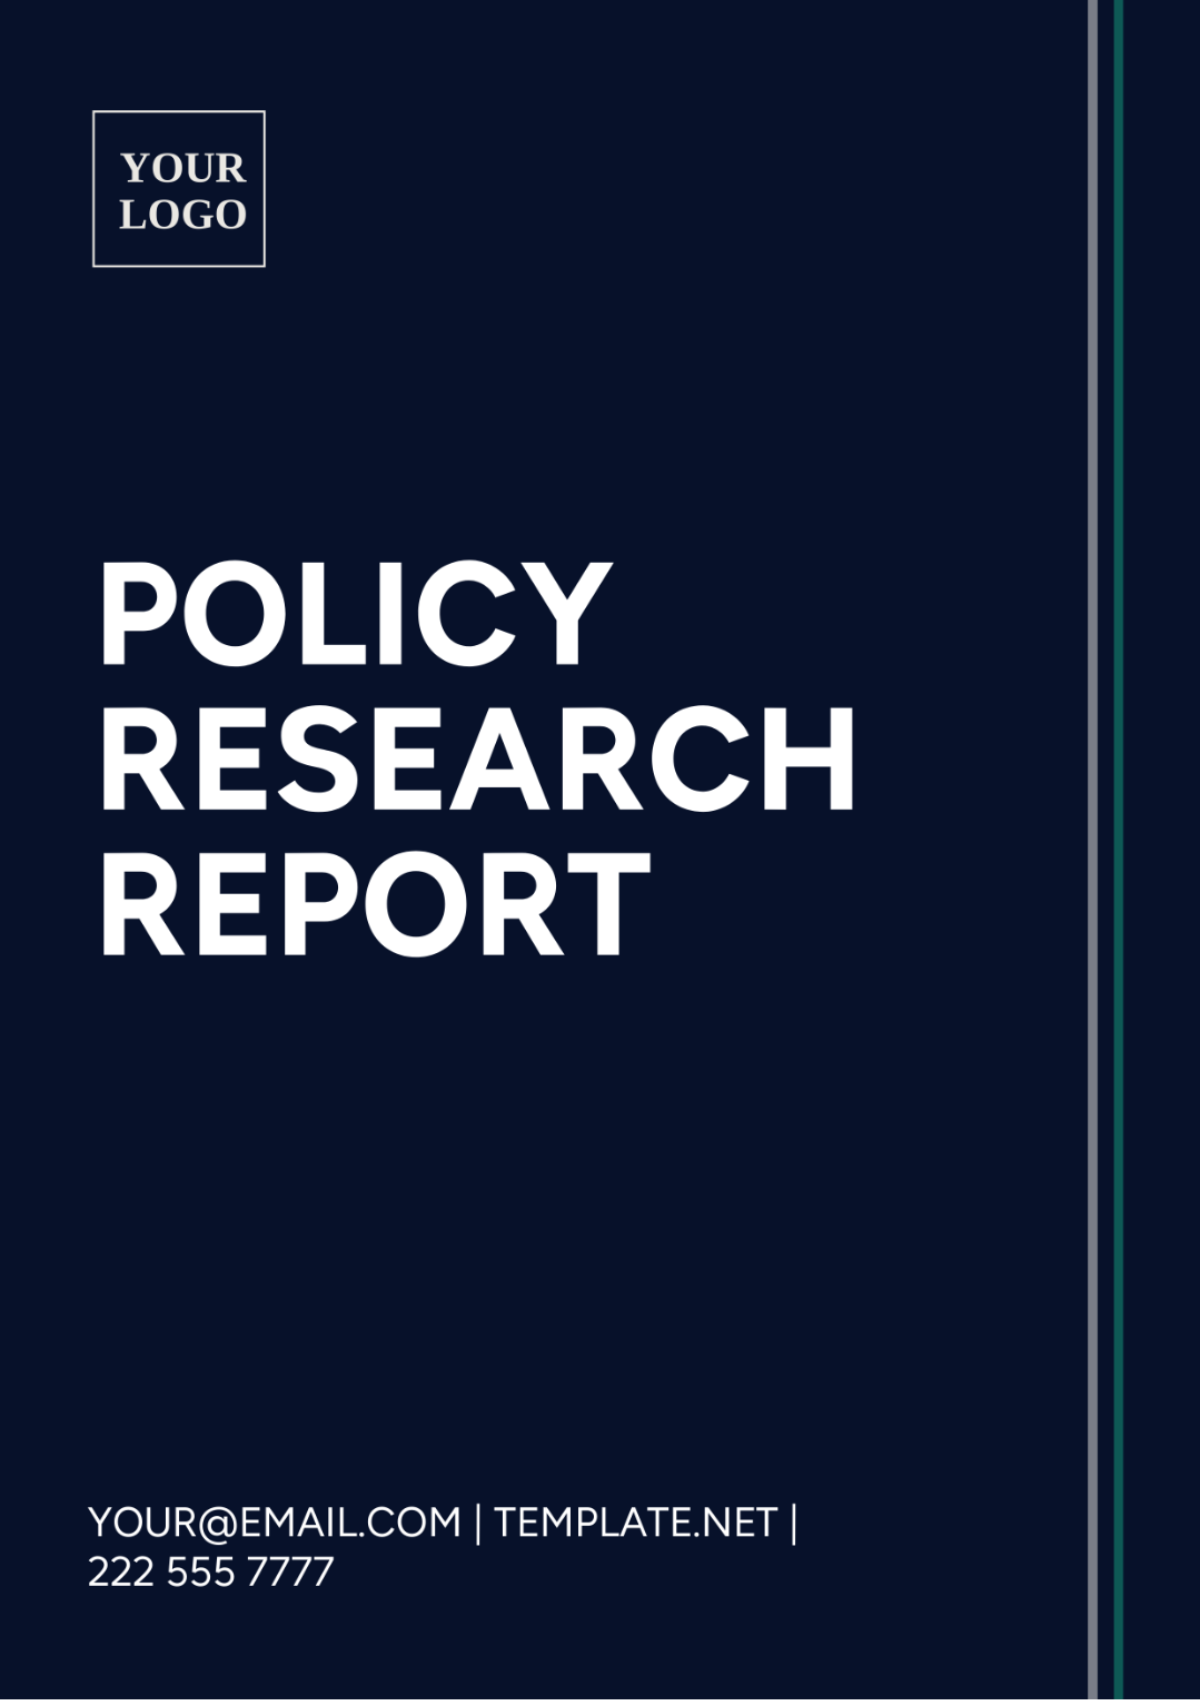 Policy Research Report Template